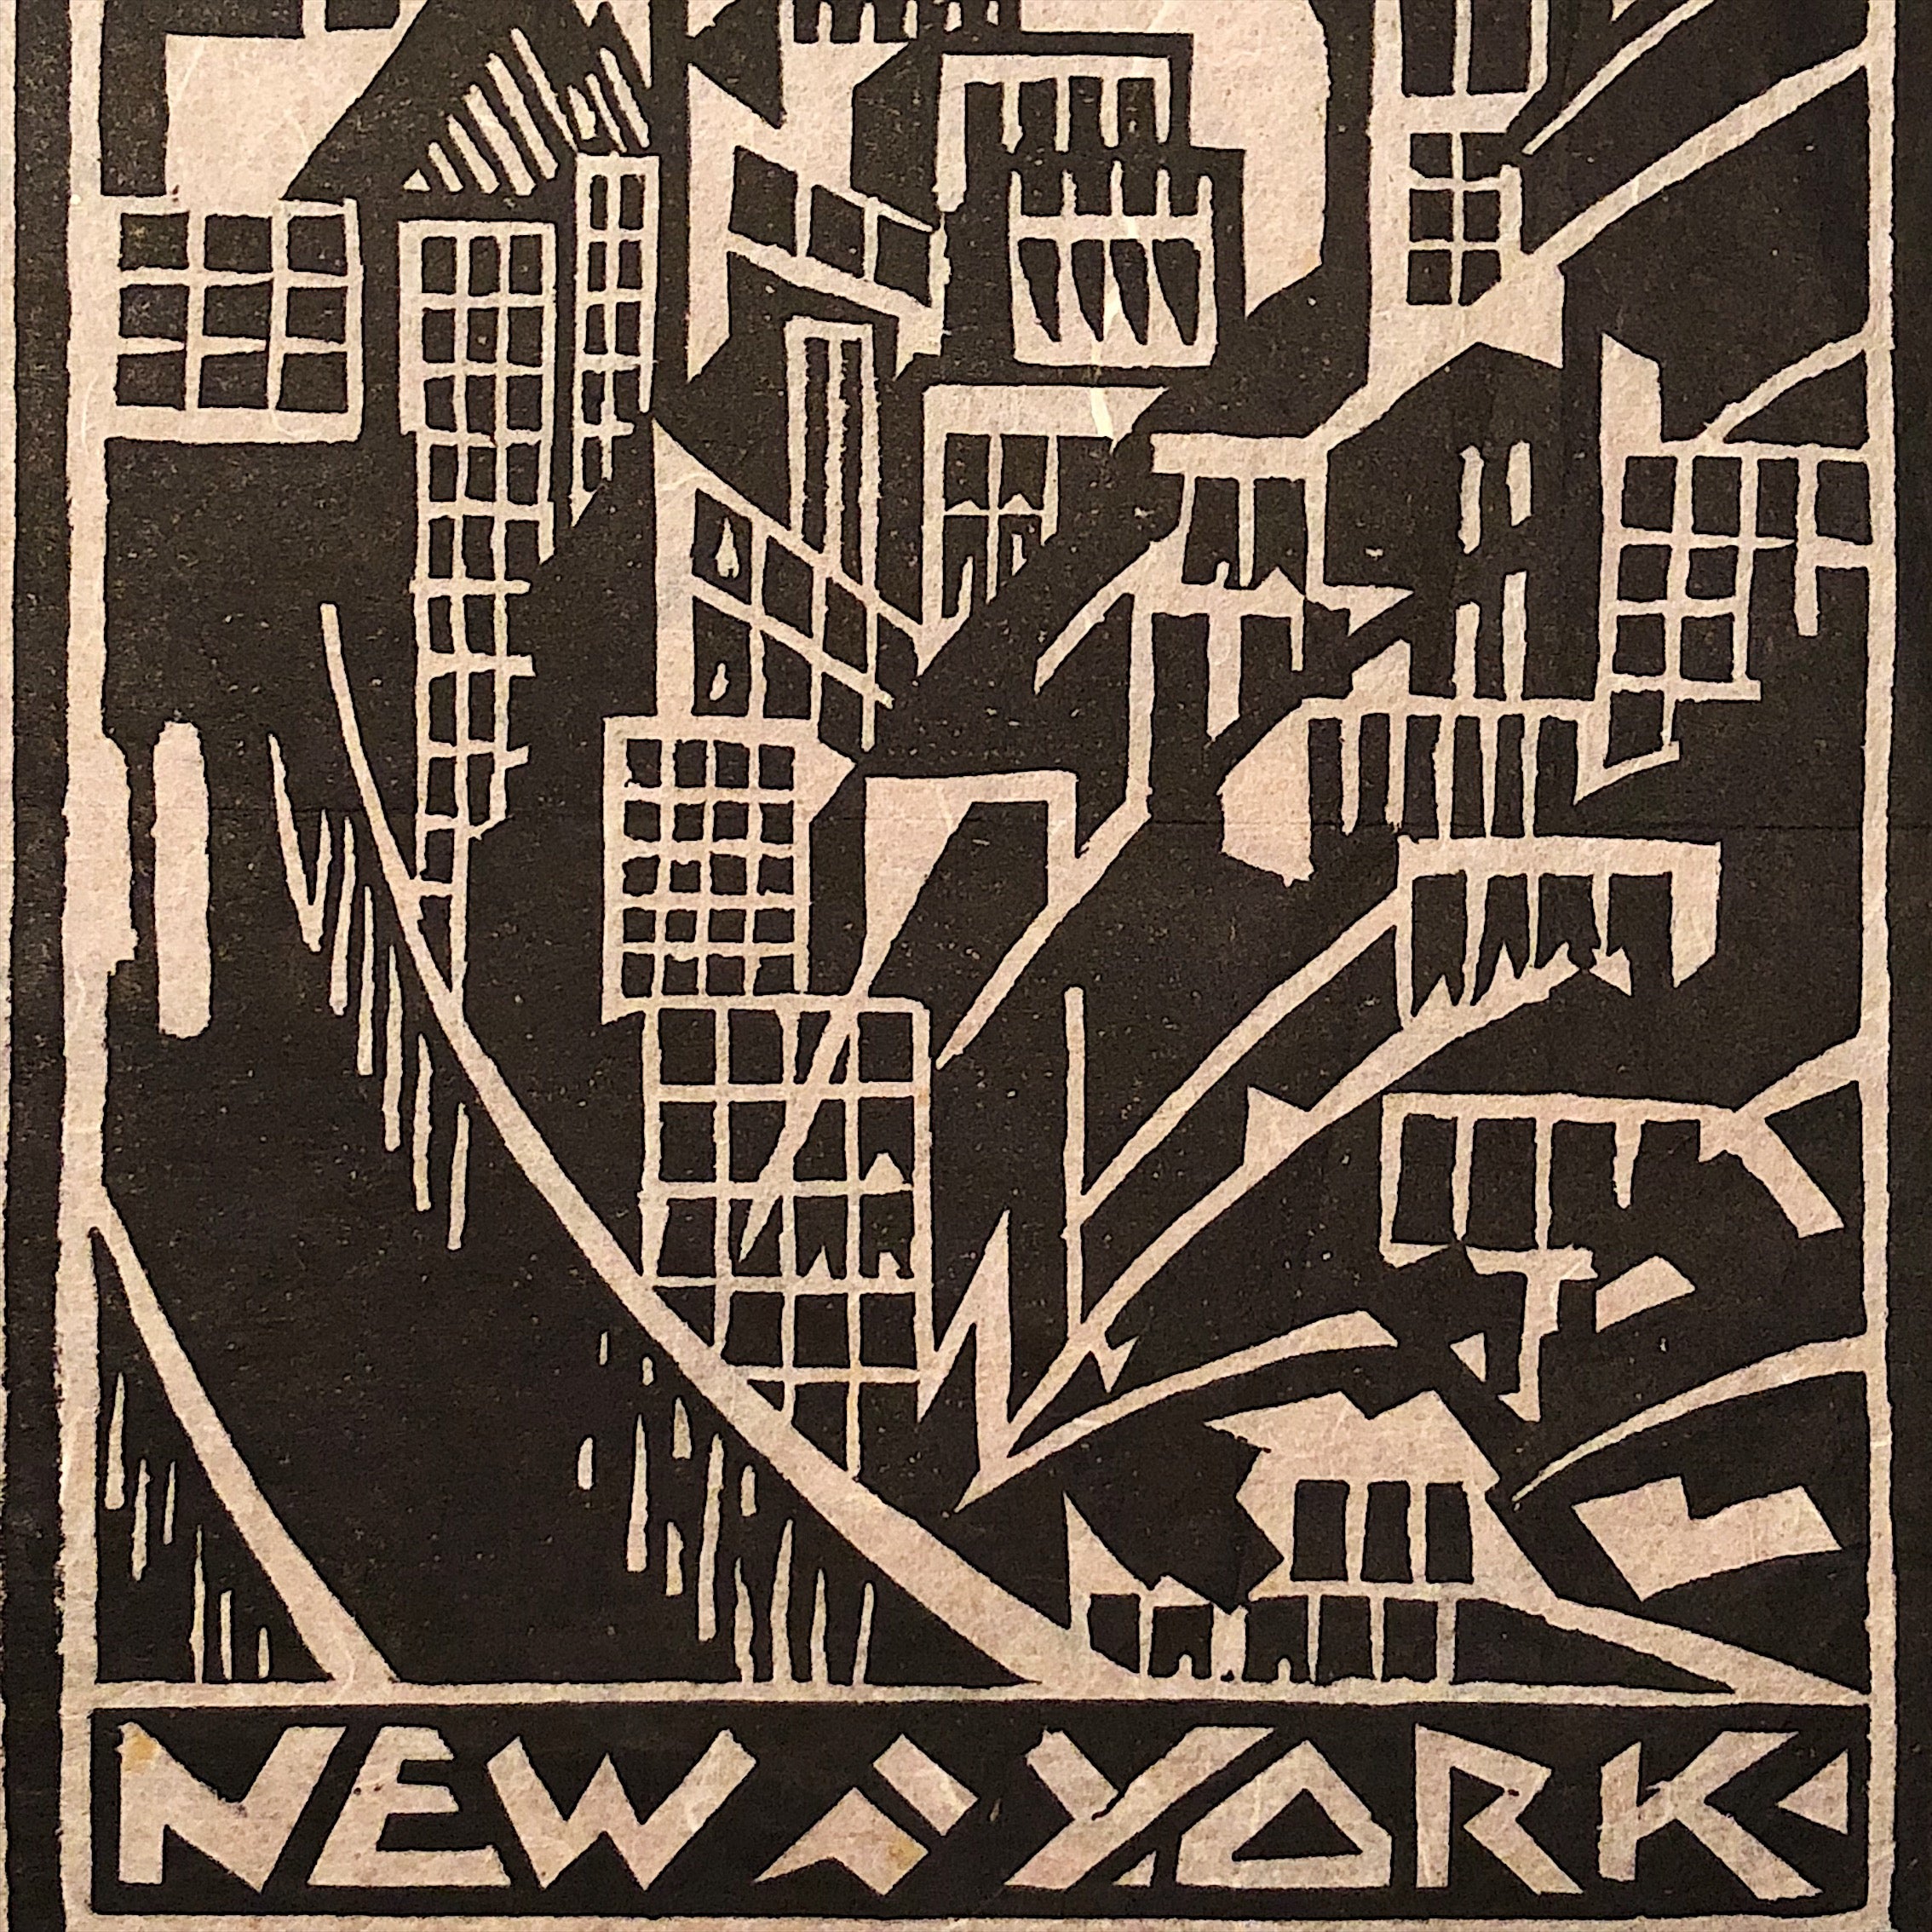 New York City Art Deco Woodcut from 1930s